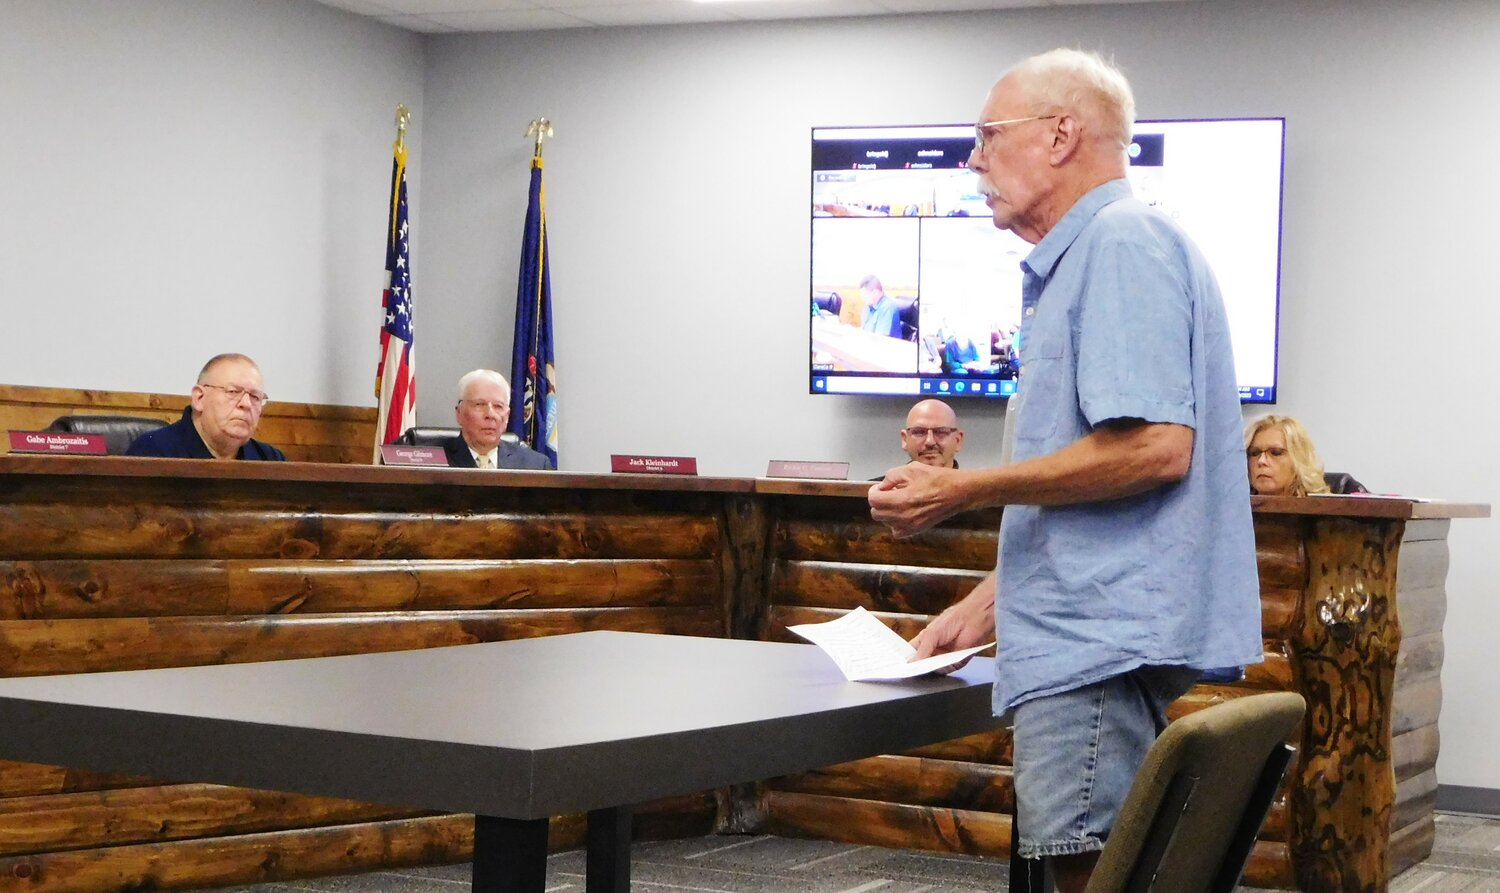 During the July 19 Board of Commissioners meeting, Kim Kennicott, pilot and former airport manager, describes the unfeasibility of a small airport being truly self-funding.